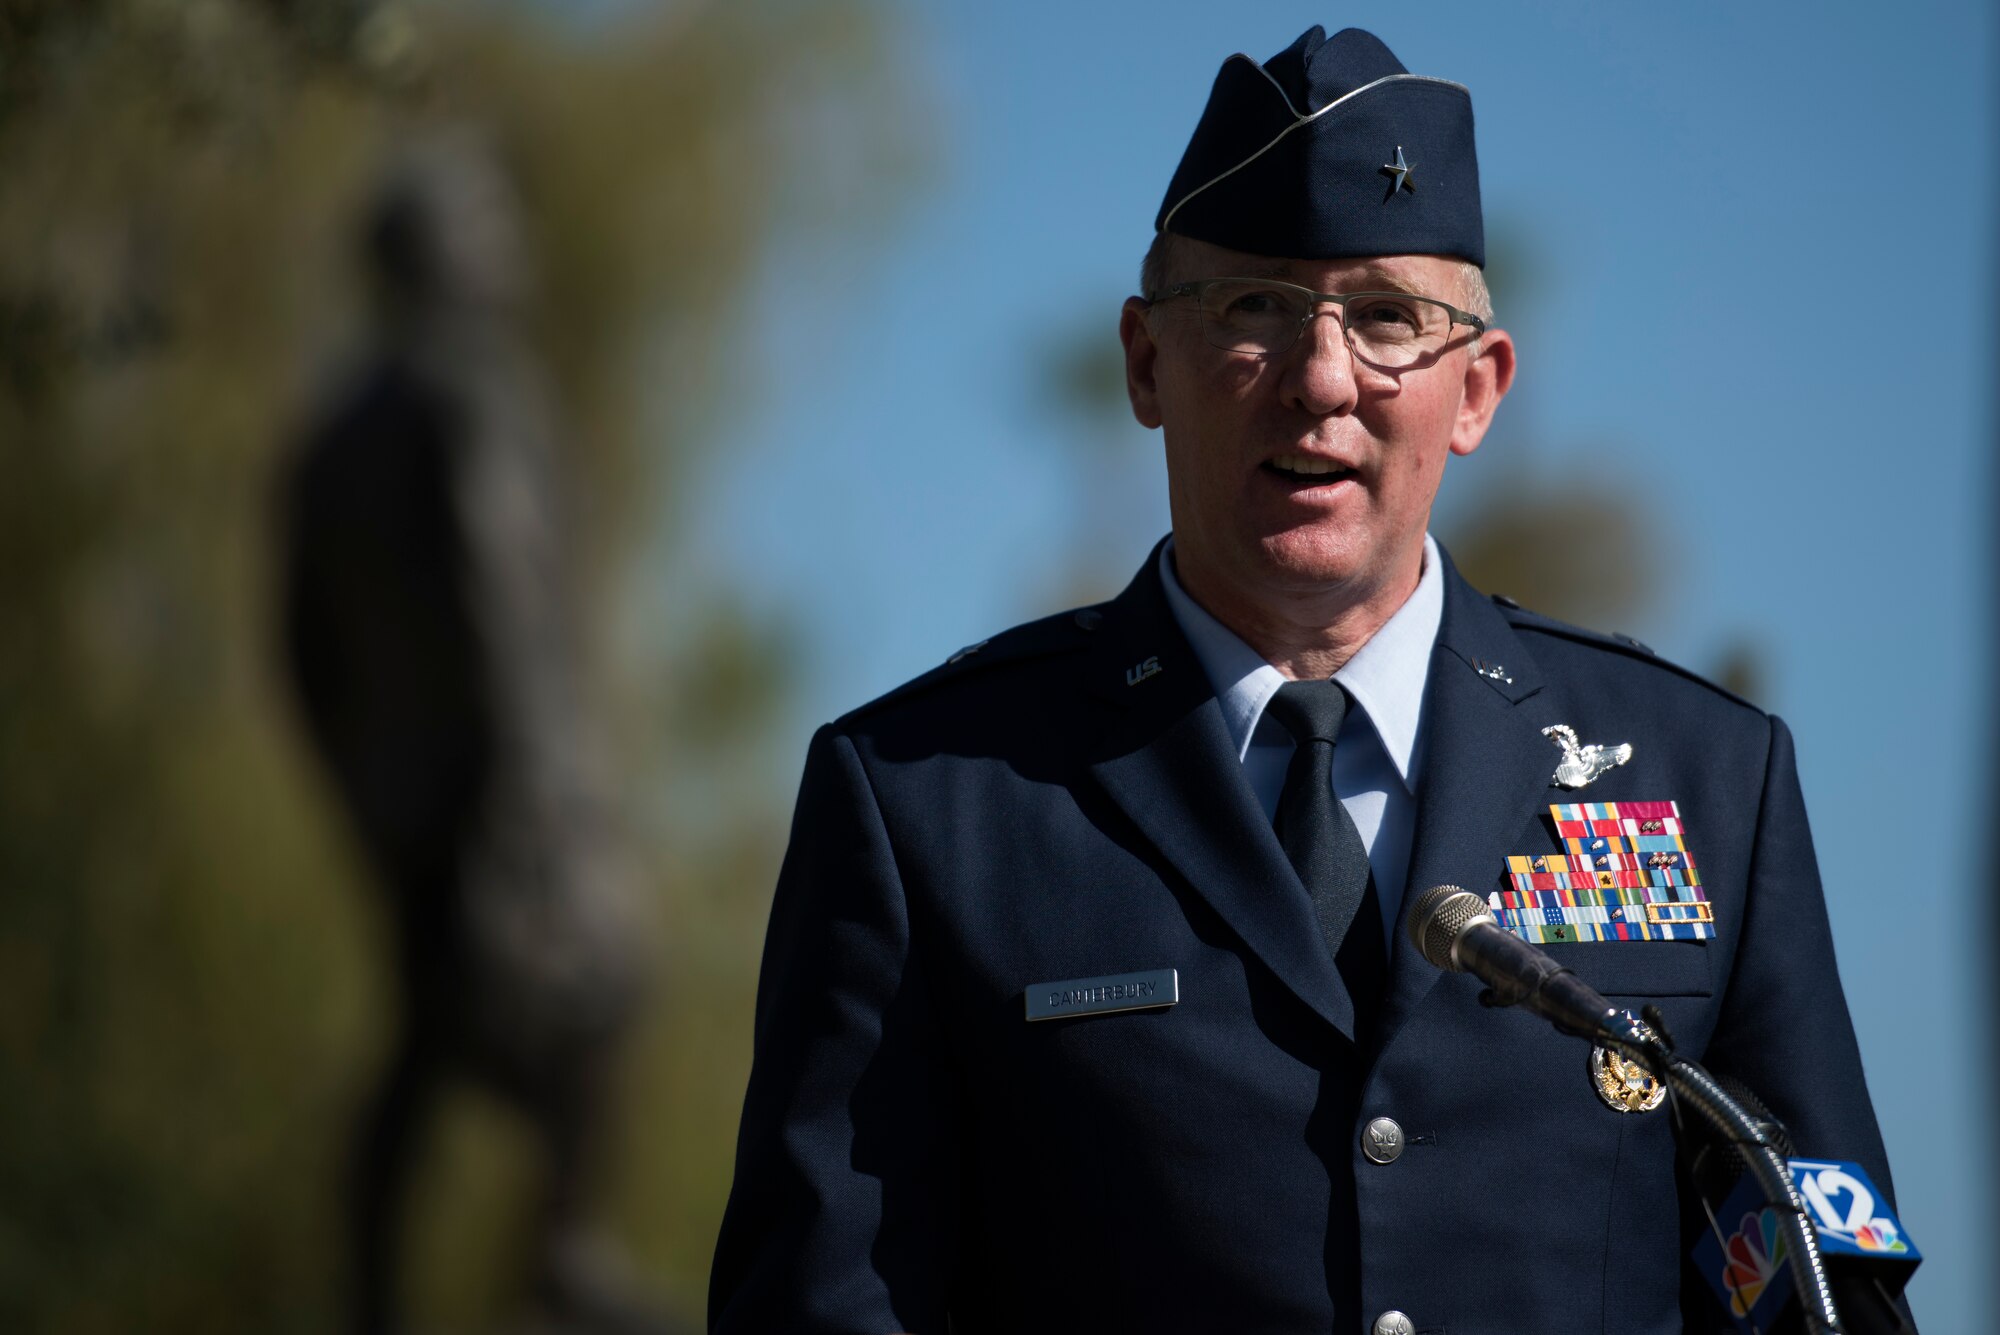 Brig. Gen. Todd Canterbury, 56th Fighter Wing commander, speaks during a ceremony commemorating the 100th anniversary of the death of 2nd Lt. Frank Luke Jr. Sept. 26, 2018, at the state capitol in Phoenix, Ariz. Luke Jr. was killed after crash landing on his final mission, when he engaged the enemy with his sidearm instead of surrendering. (U.S. Air Force photo by Senior Airman Ridge Shan)